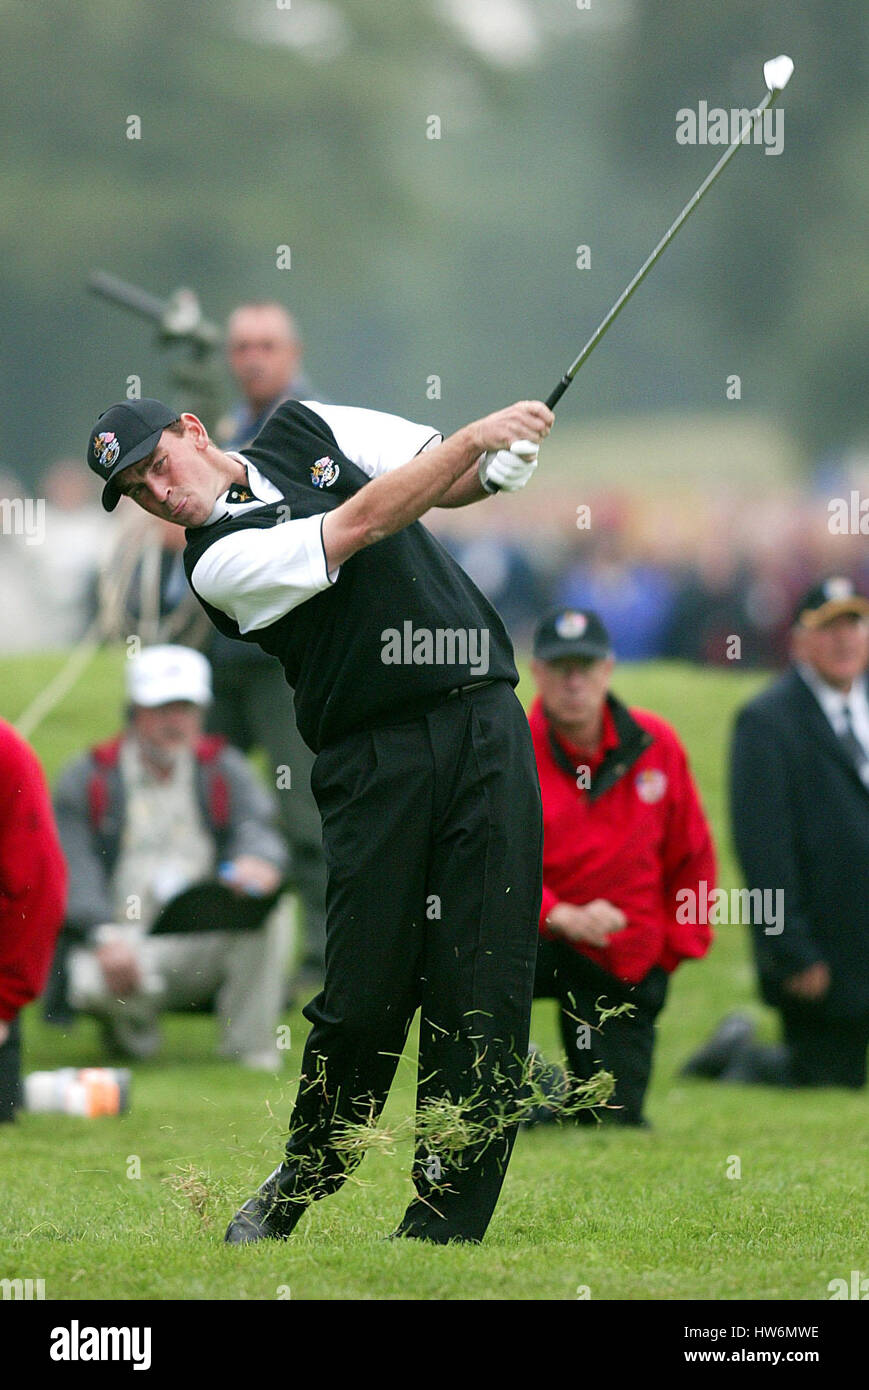 THOMAS BJORN RYDER CUP 02 8TH HOLE THE BELFRY SUTTON COLDFIELD BIRMINGHAM ENGLAND 28 September 2002 Stock Photo